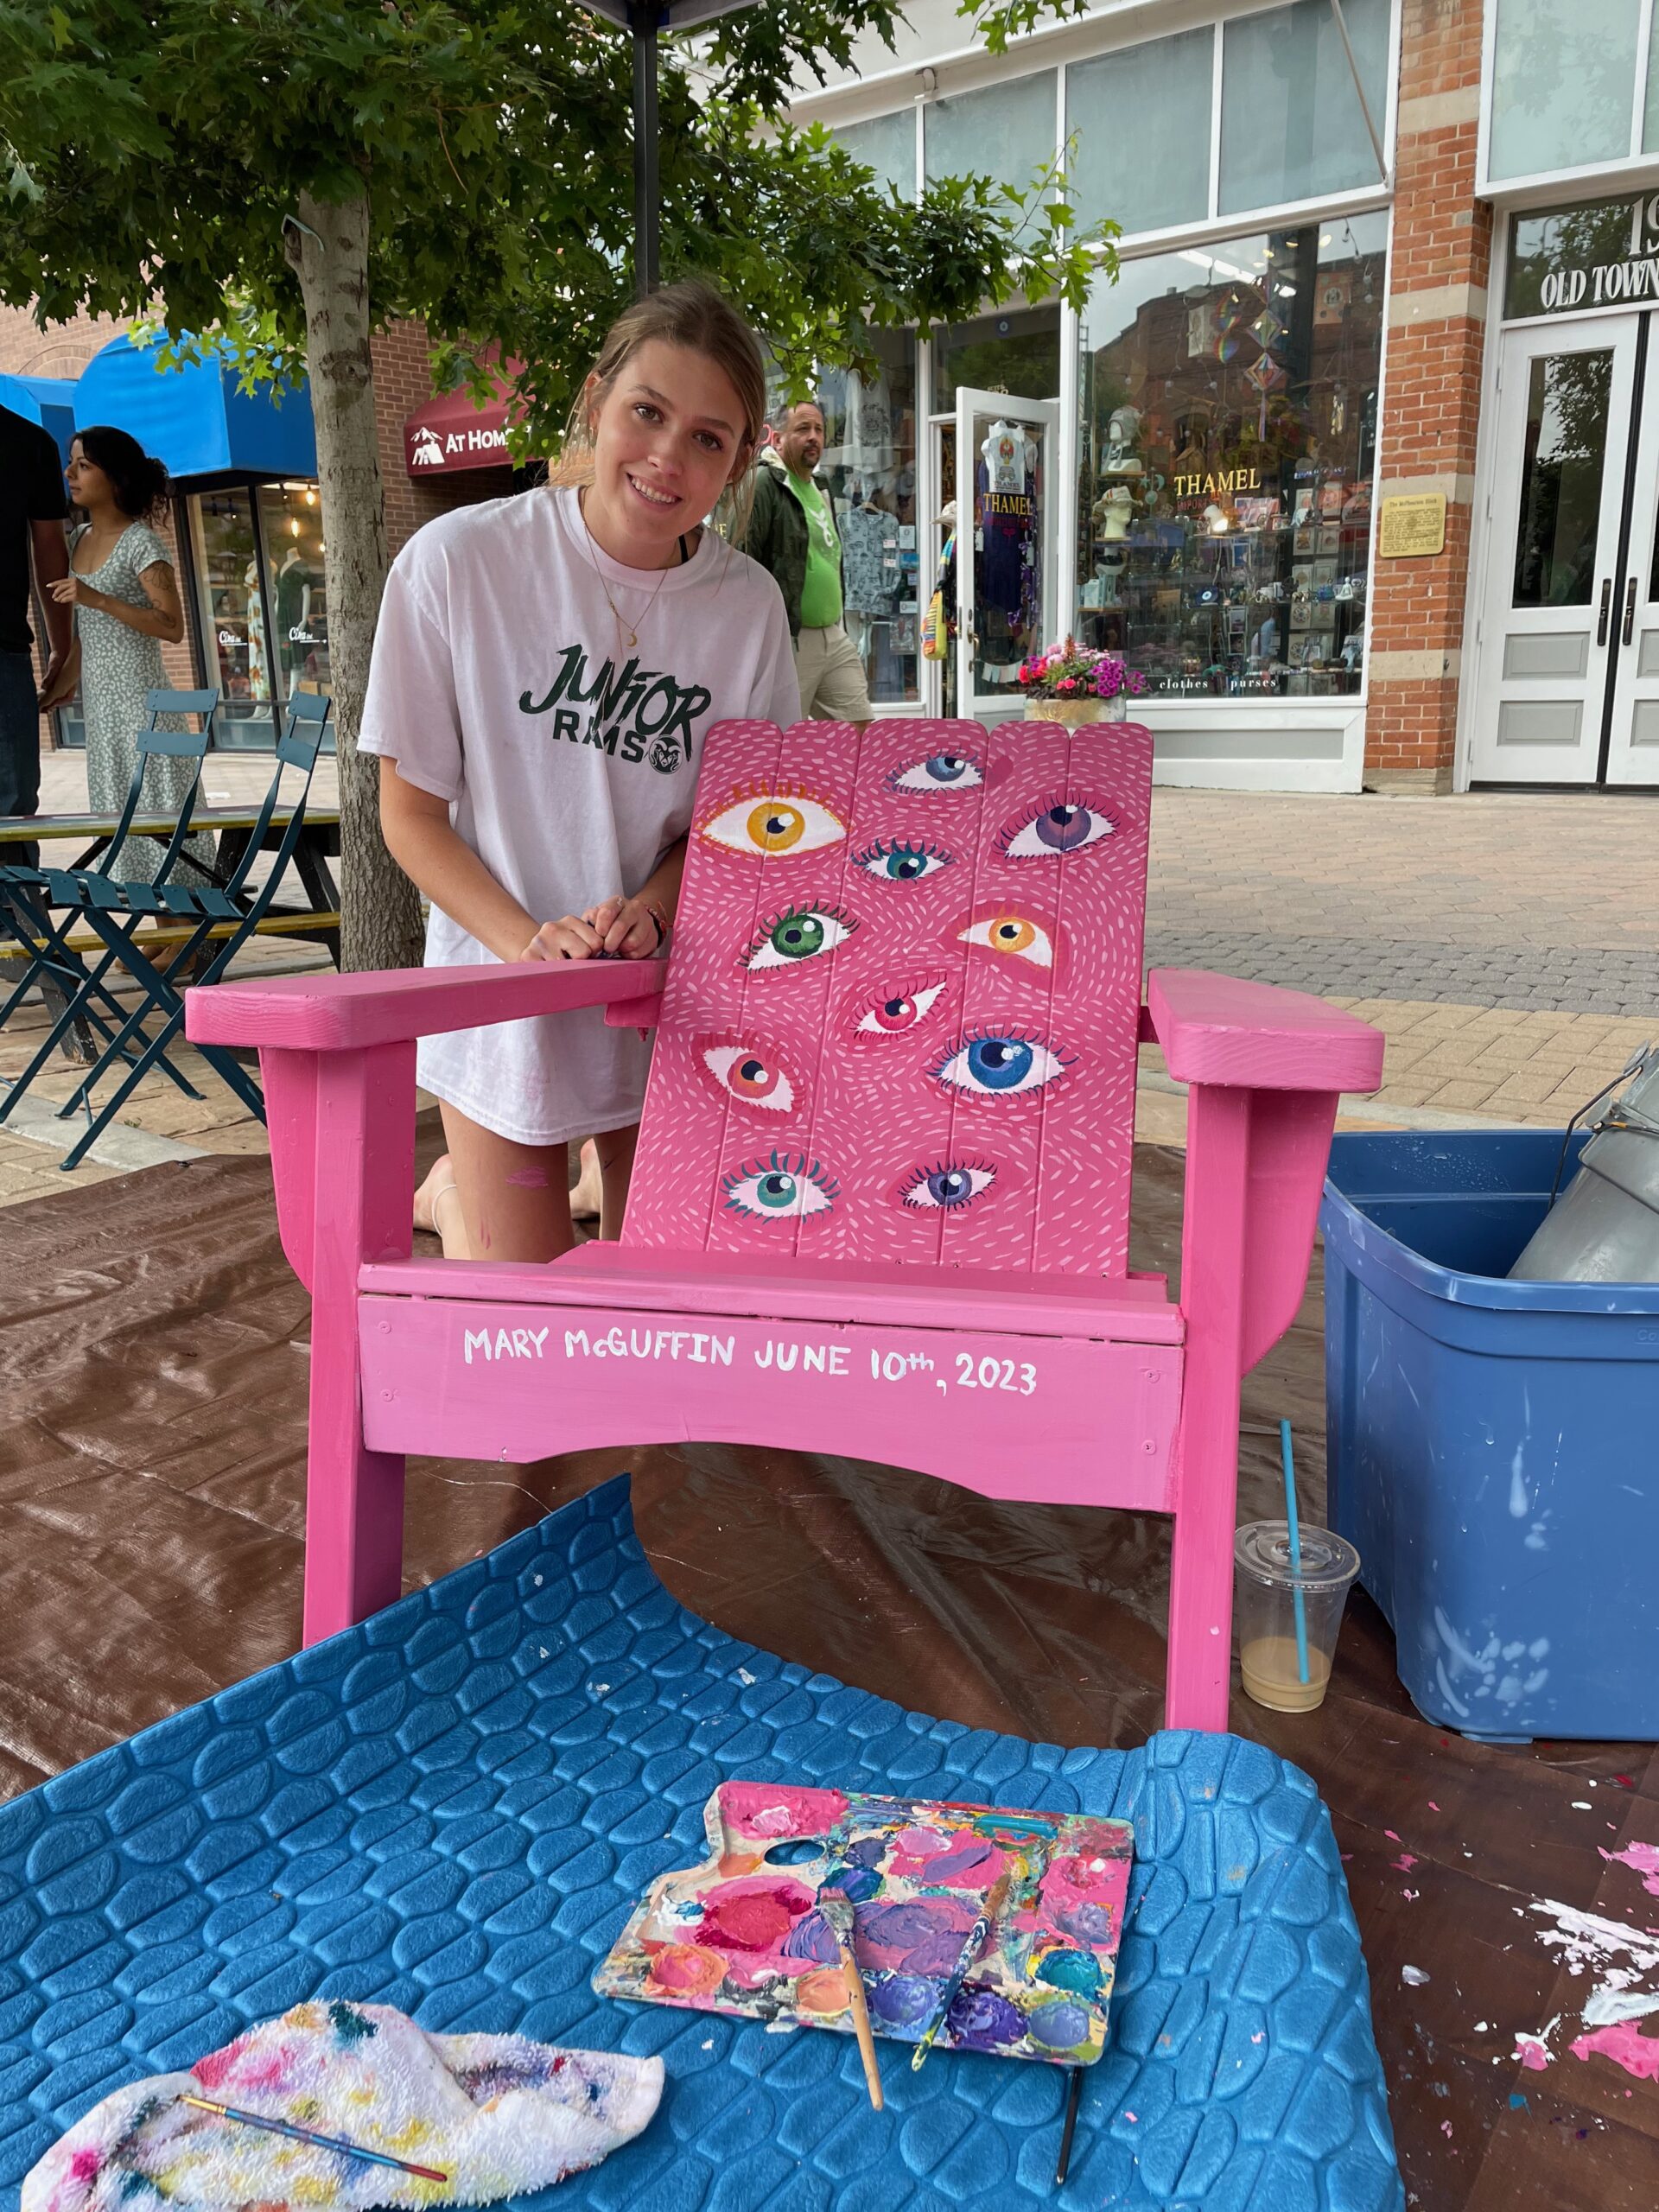 woman displaying painted Adirondack chair with multiple eyeballs painted with pink background